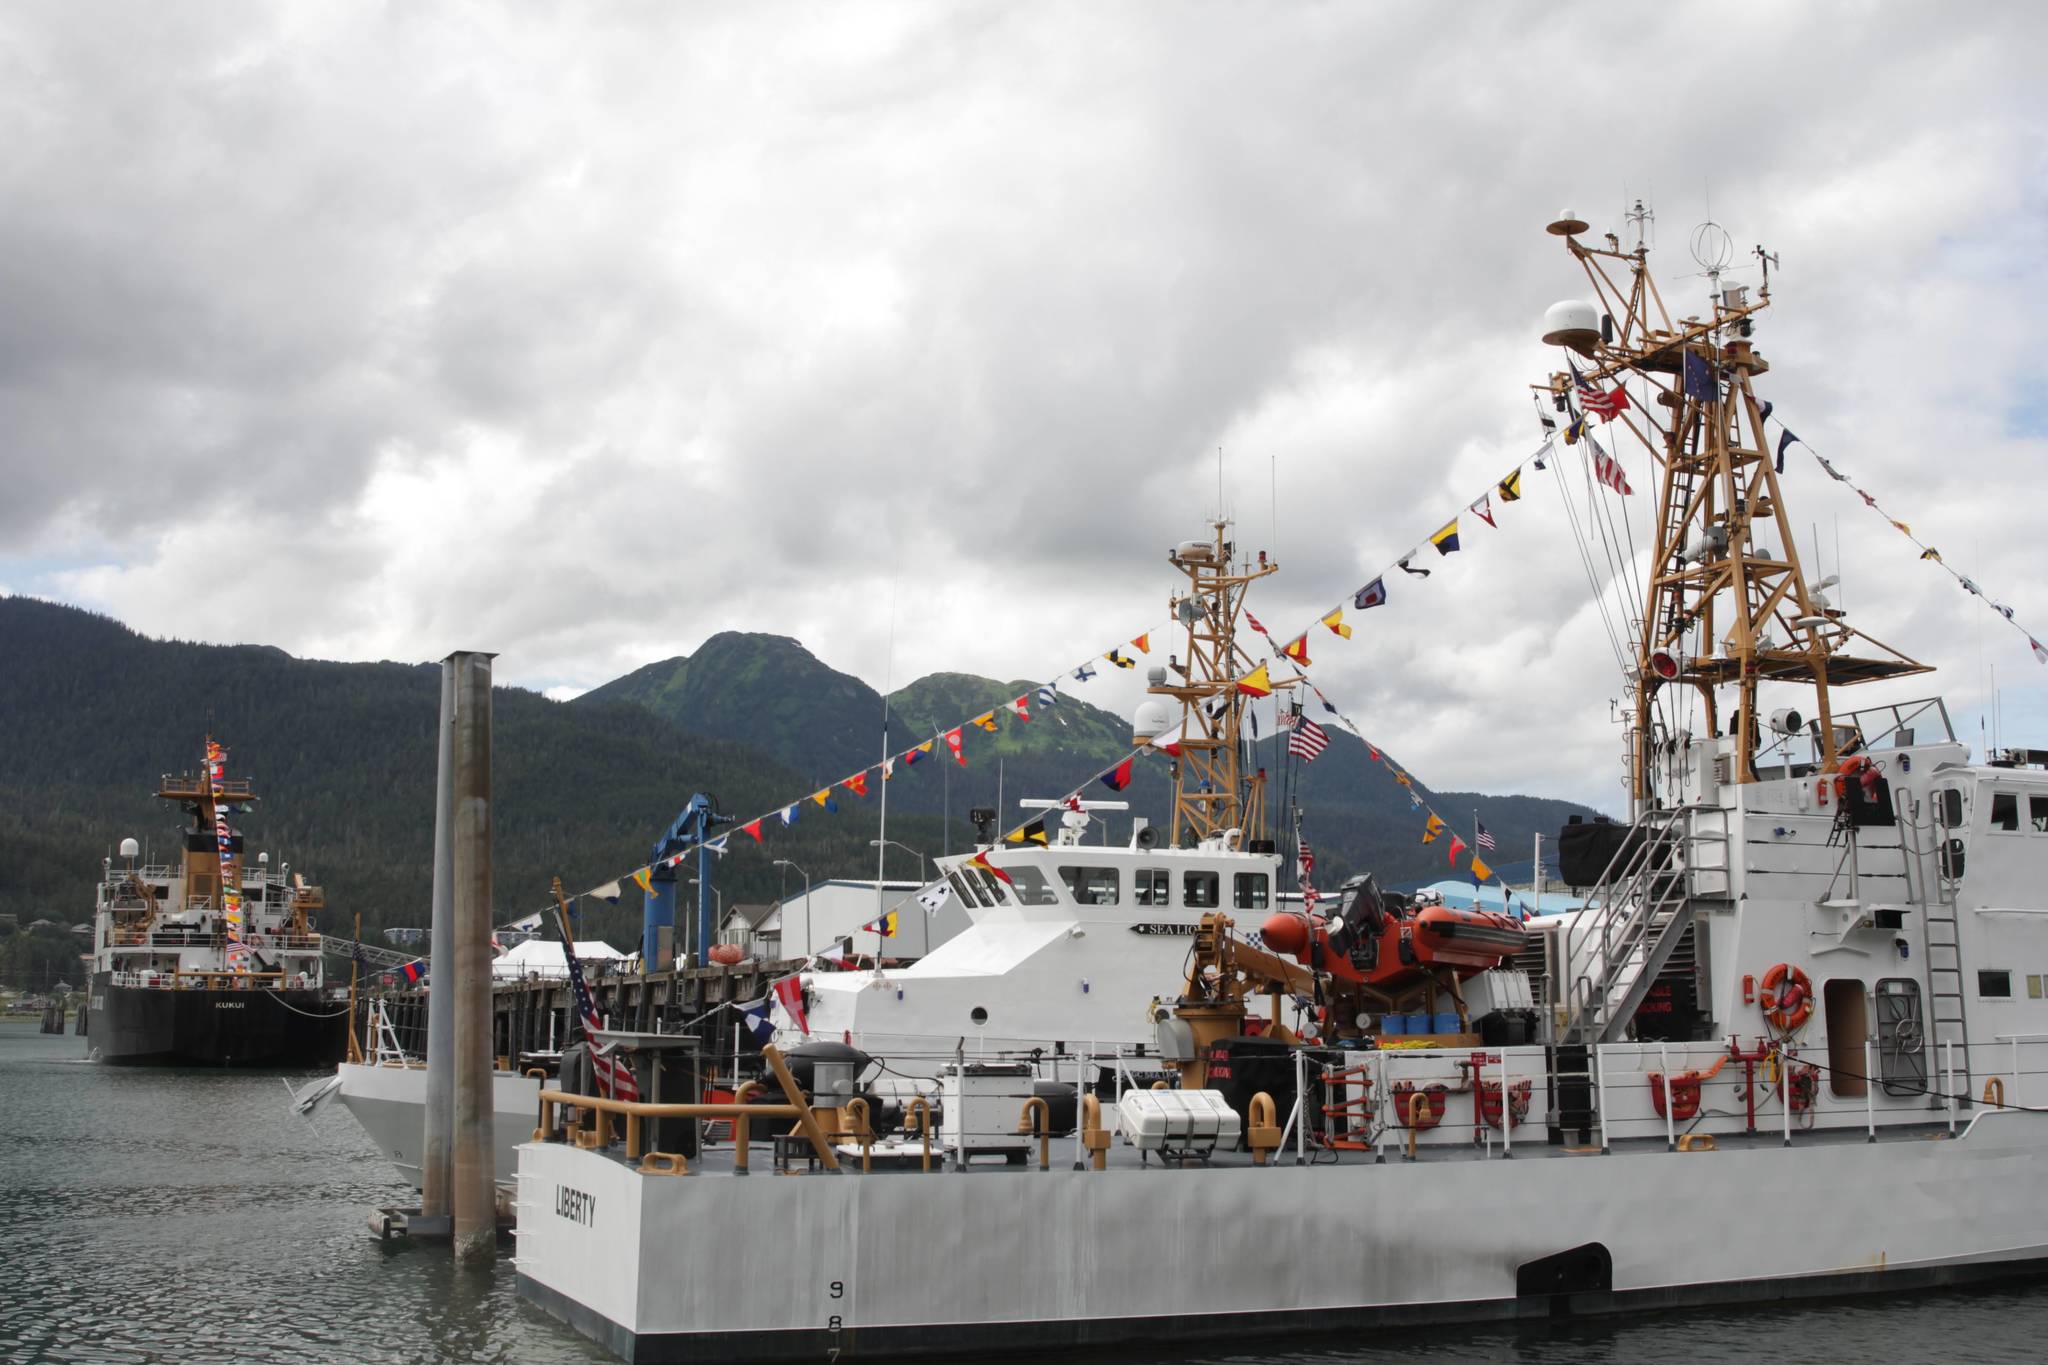 Coast Guard cutters Liberty and Sea Lion along with buoy tender Kukui were present for Sector Juneau’s change of command ceremony on July 7, 2021. (Michael S. Lockett / Juneau Empire)